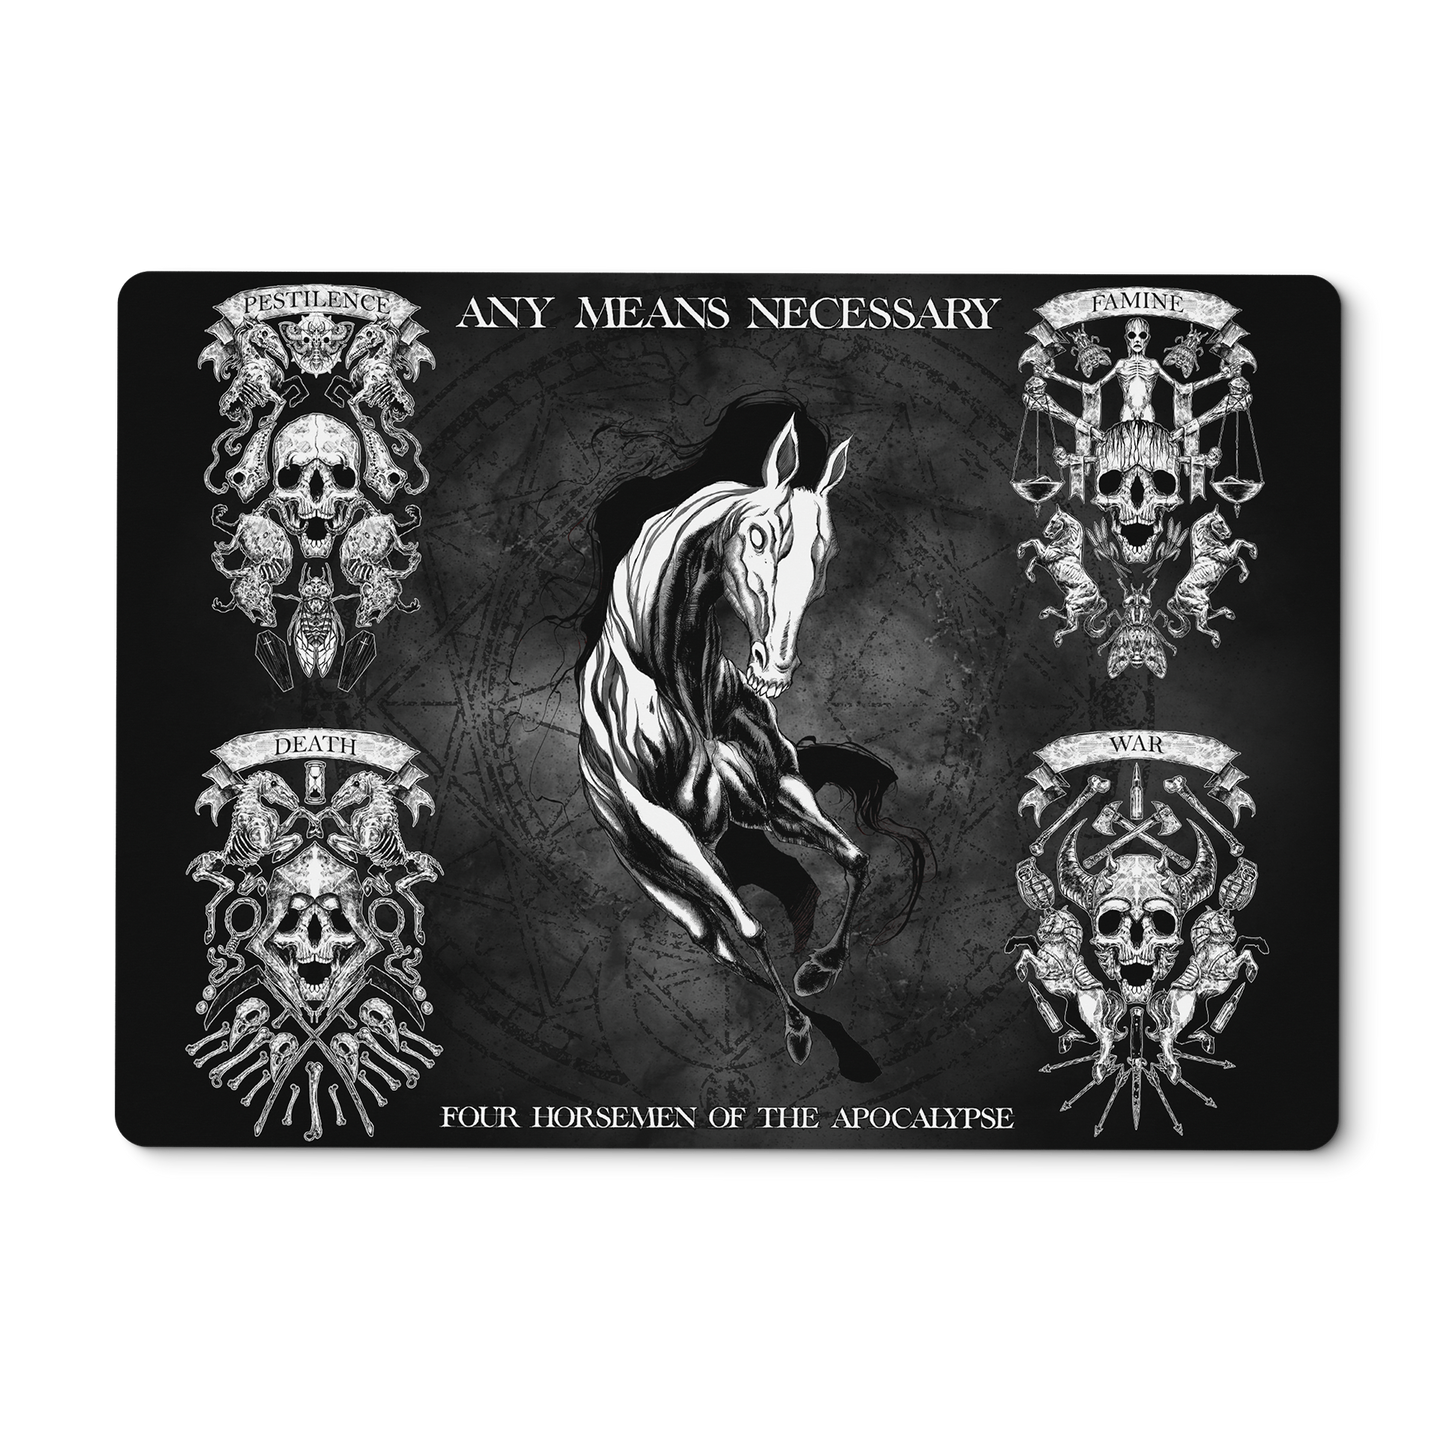 any means necessary shawn coss 4 horsemen of the apocalypse pestilence death famine war gaming mouse pad